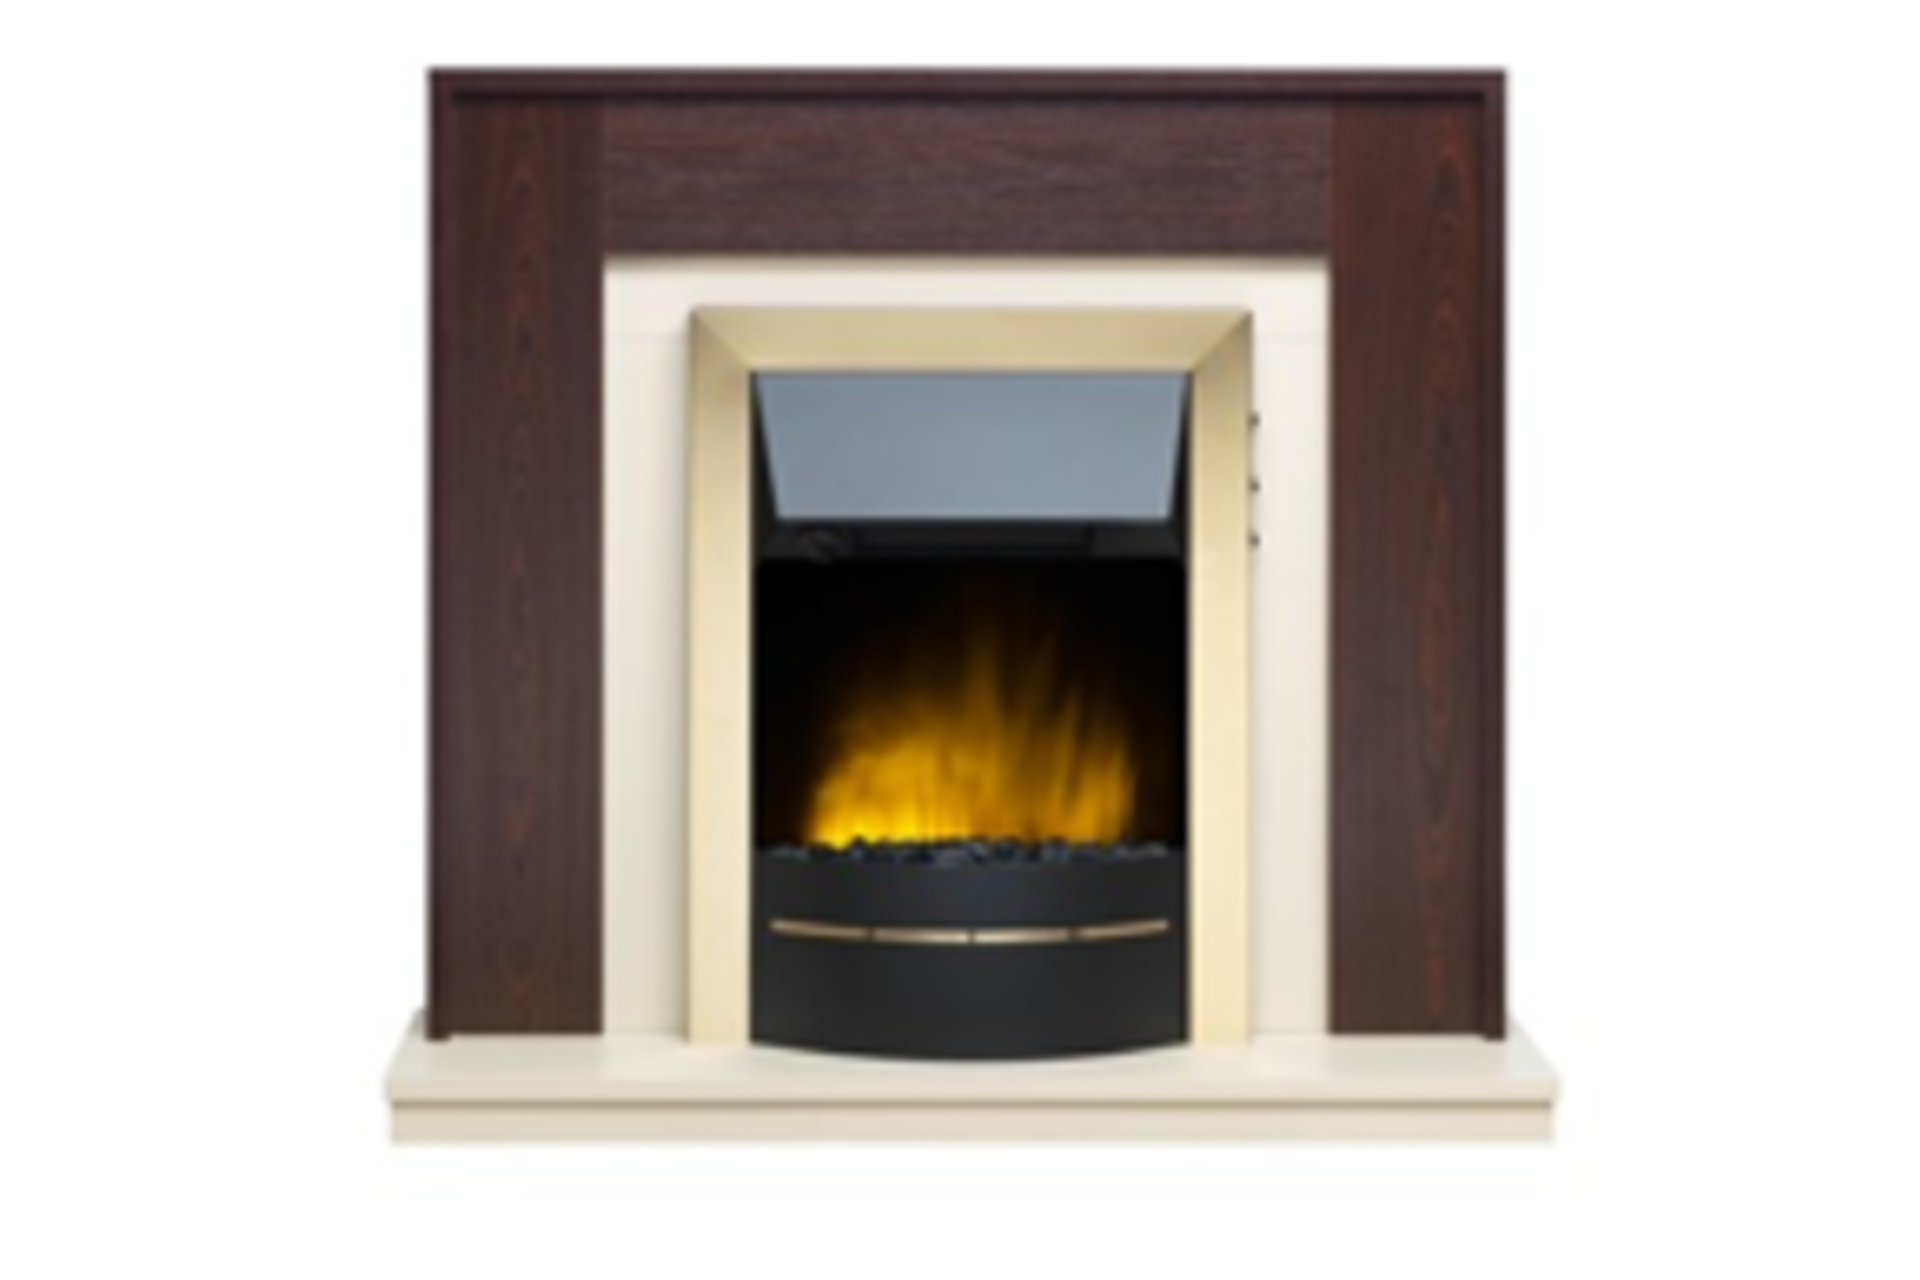 New - Roma KLX Fire Suite Mahogany. RRP £599.99.• LED technology– expected lifespan of 50,000 hrs. •